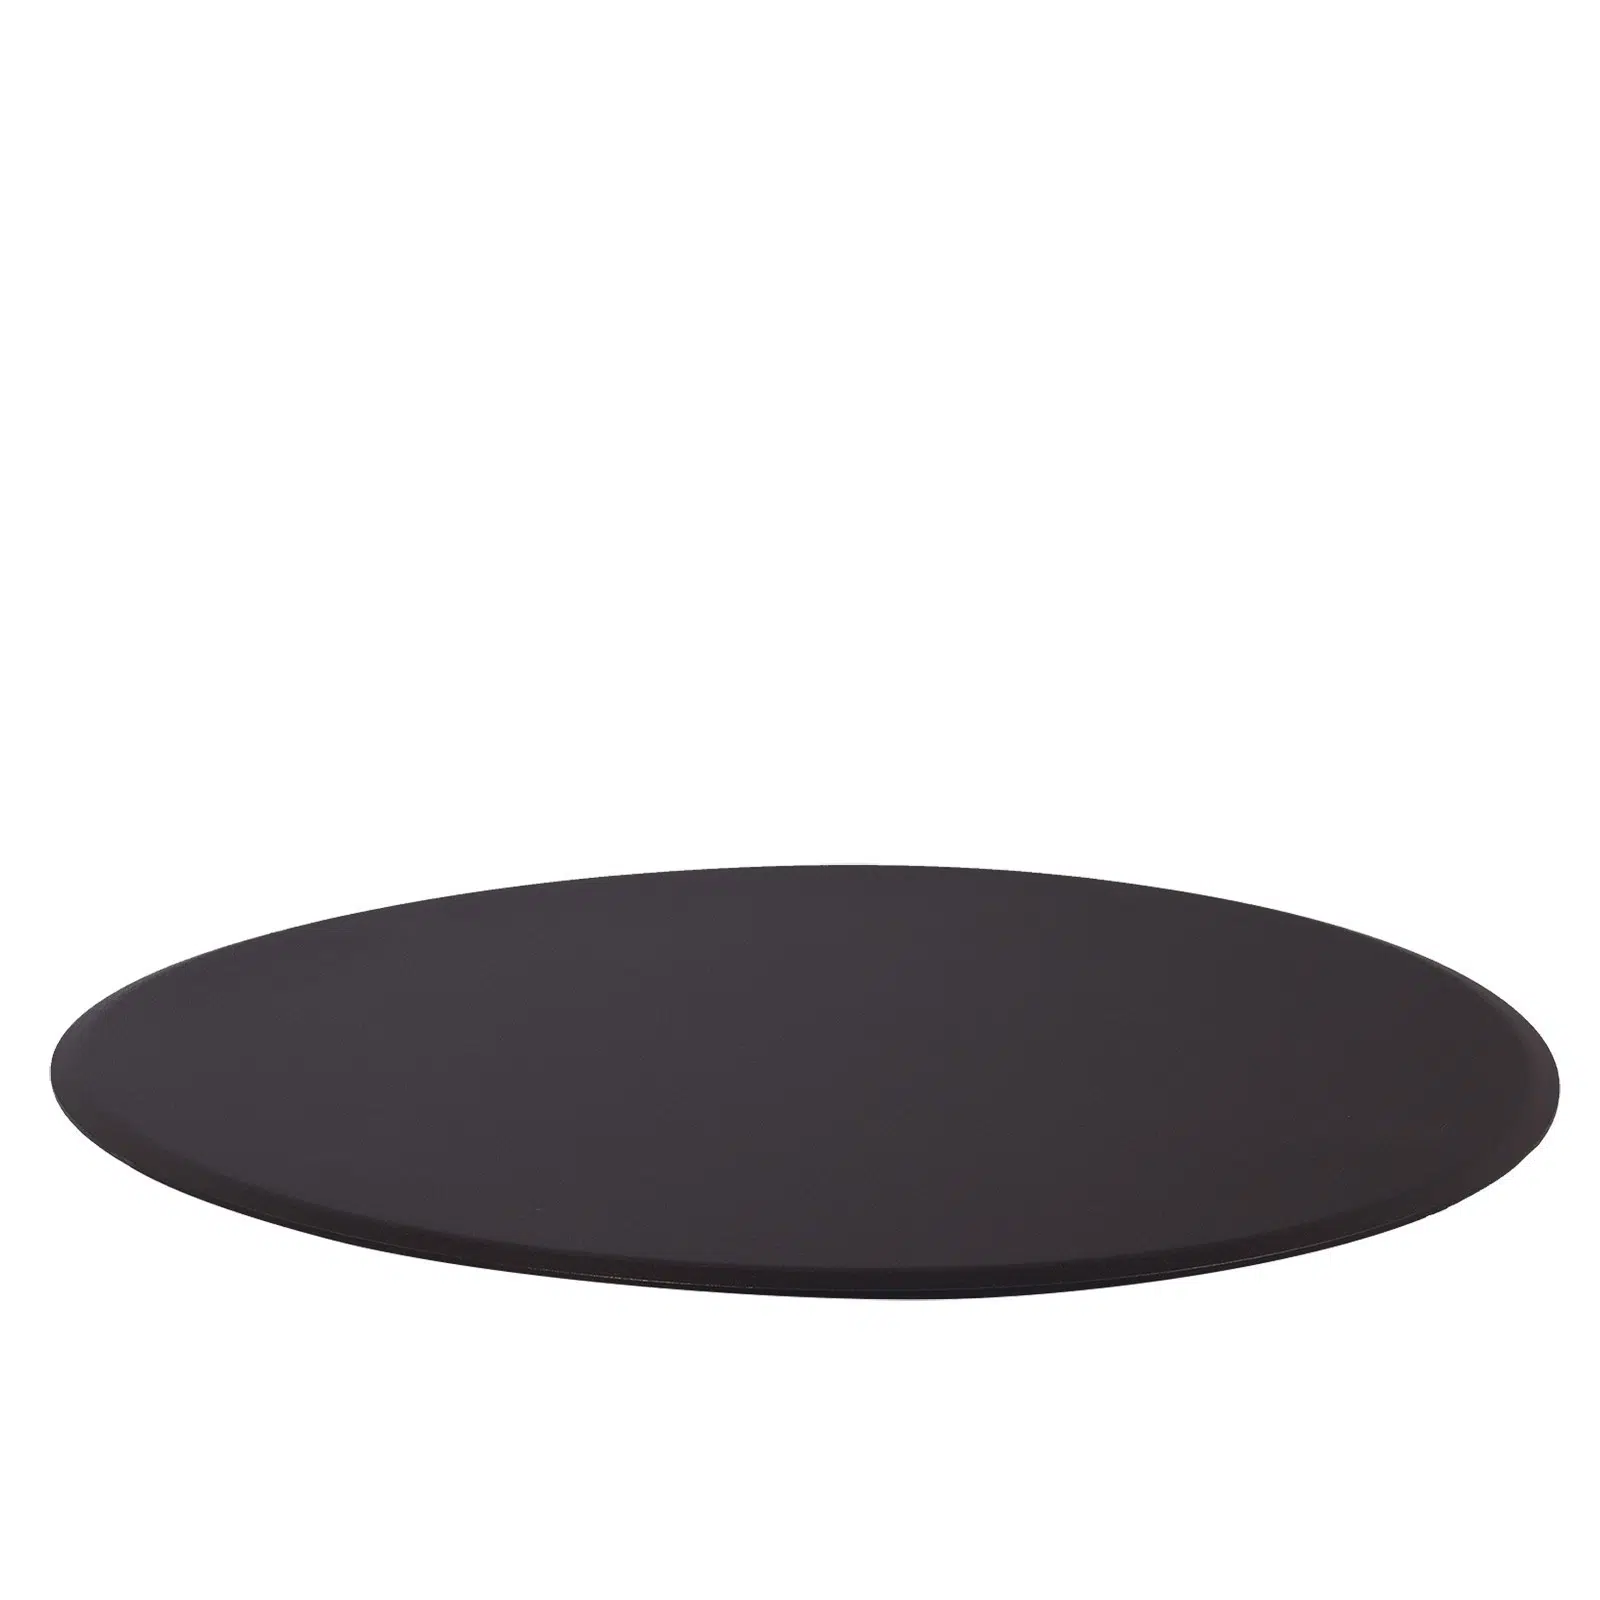 Fire Pit Accessories Large Round Fire Pit Flat Cover fits 24 Round Burnernbsp - Hausers Pationbsp